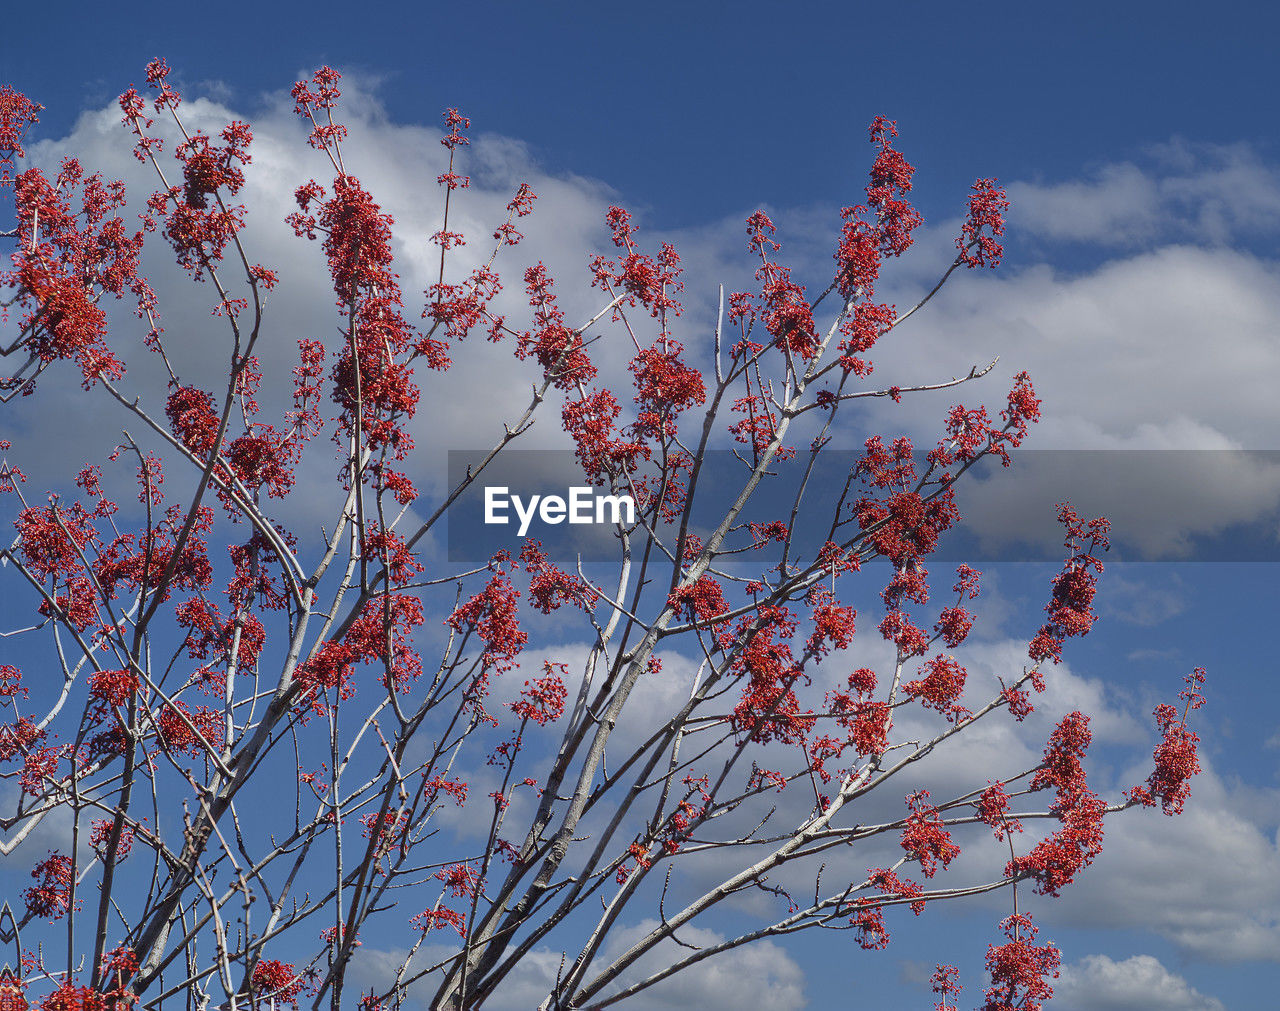 sky, flower, plant, nature, beauty in nature, tree, low angle view, cloud, no people, red, growth, blue, blossom, branch, outdoors, flowering plant, freshness, day, springtime, tranquility, autumn, leaf, pink, scenics - nature